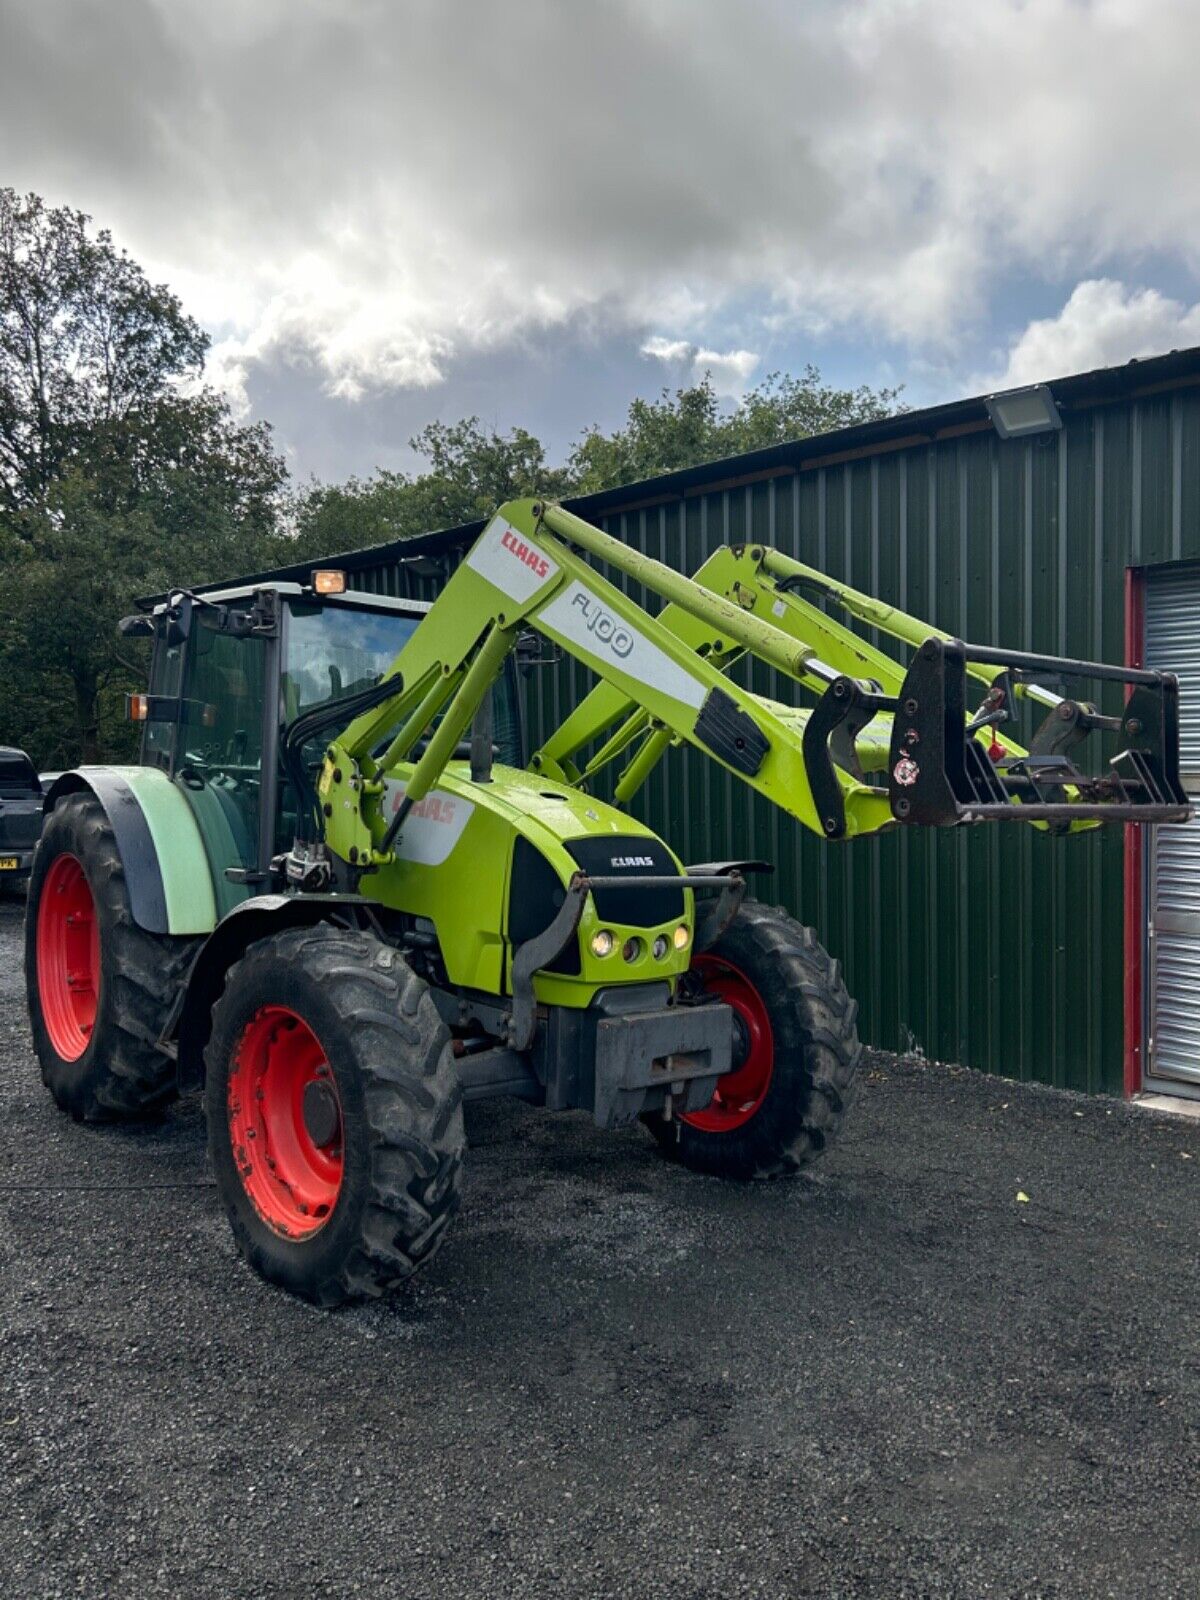 Bid on 2007 CLAAS 456 LOADER TRACTOR (JOHN DEERE ENGINE 100HP)**- Buy &amp; Sell on Auction with EAMA Group